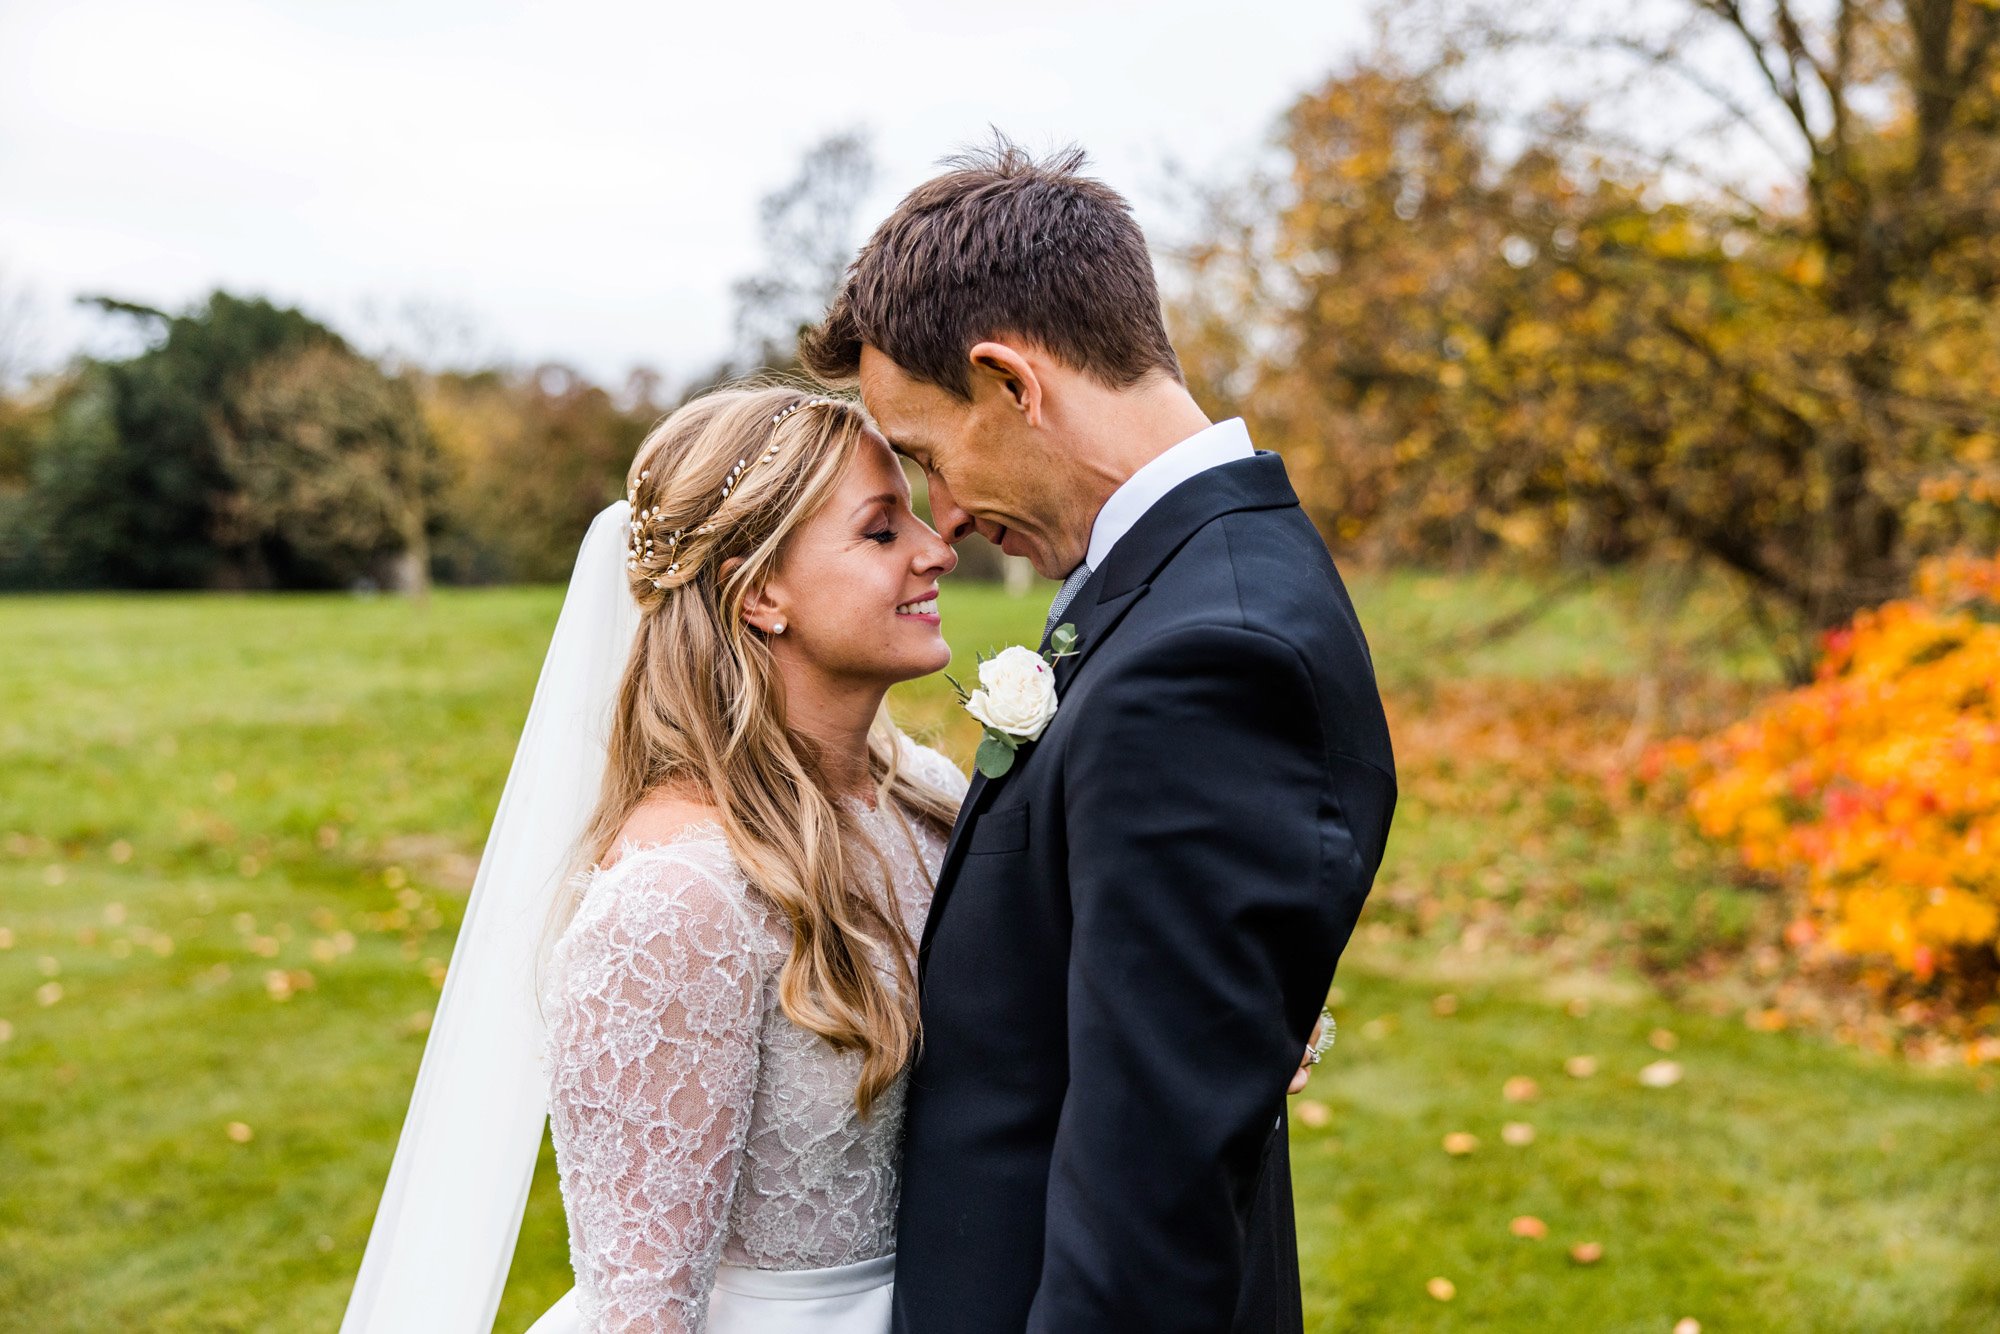 Bride in pearl headpiece and veil touches noses and smiles with her groom outside stately home elmore court on their autumn wedding day